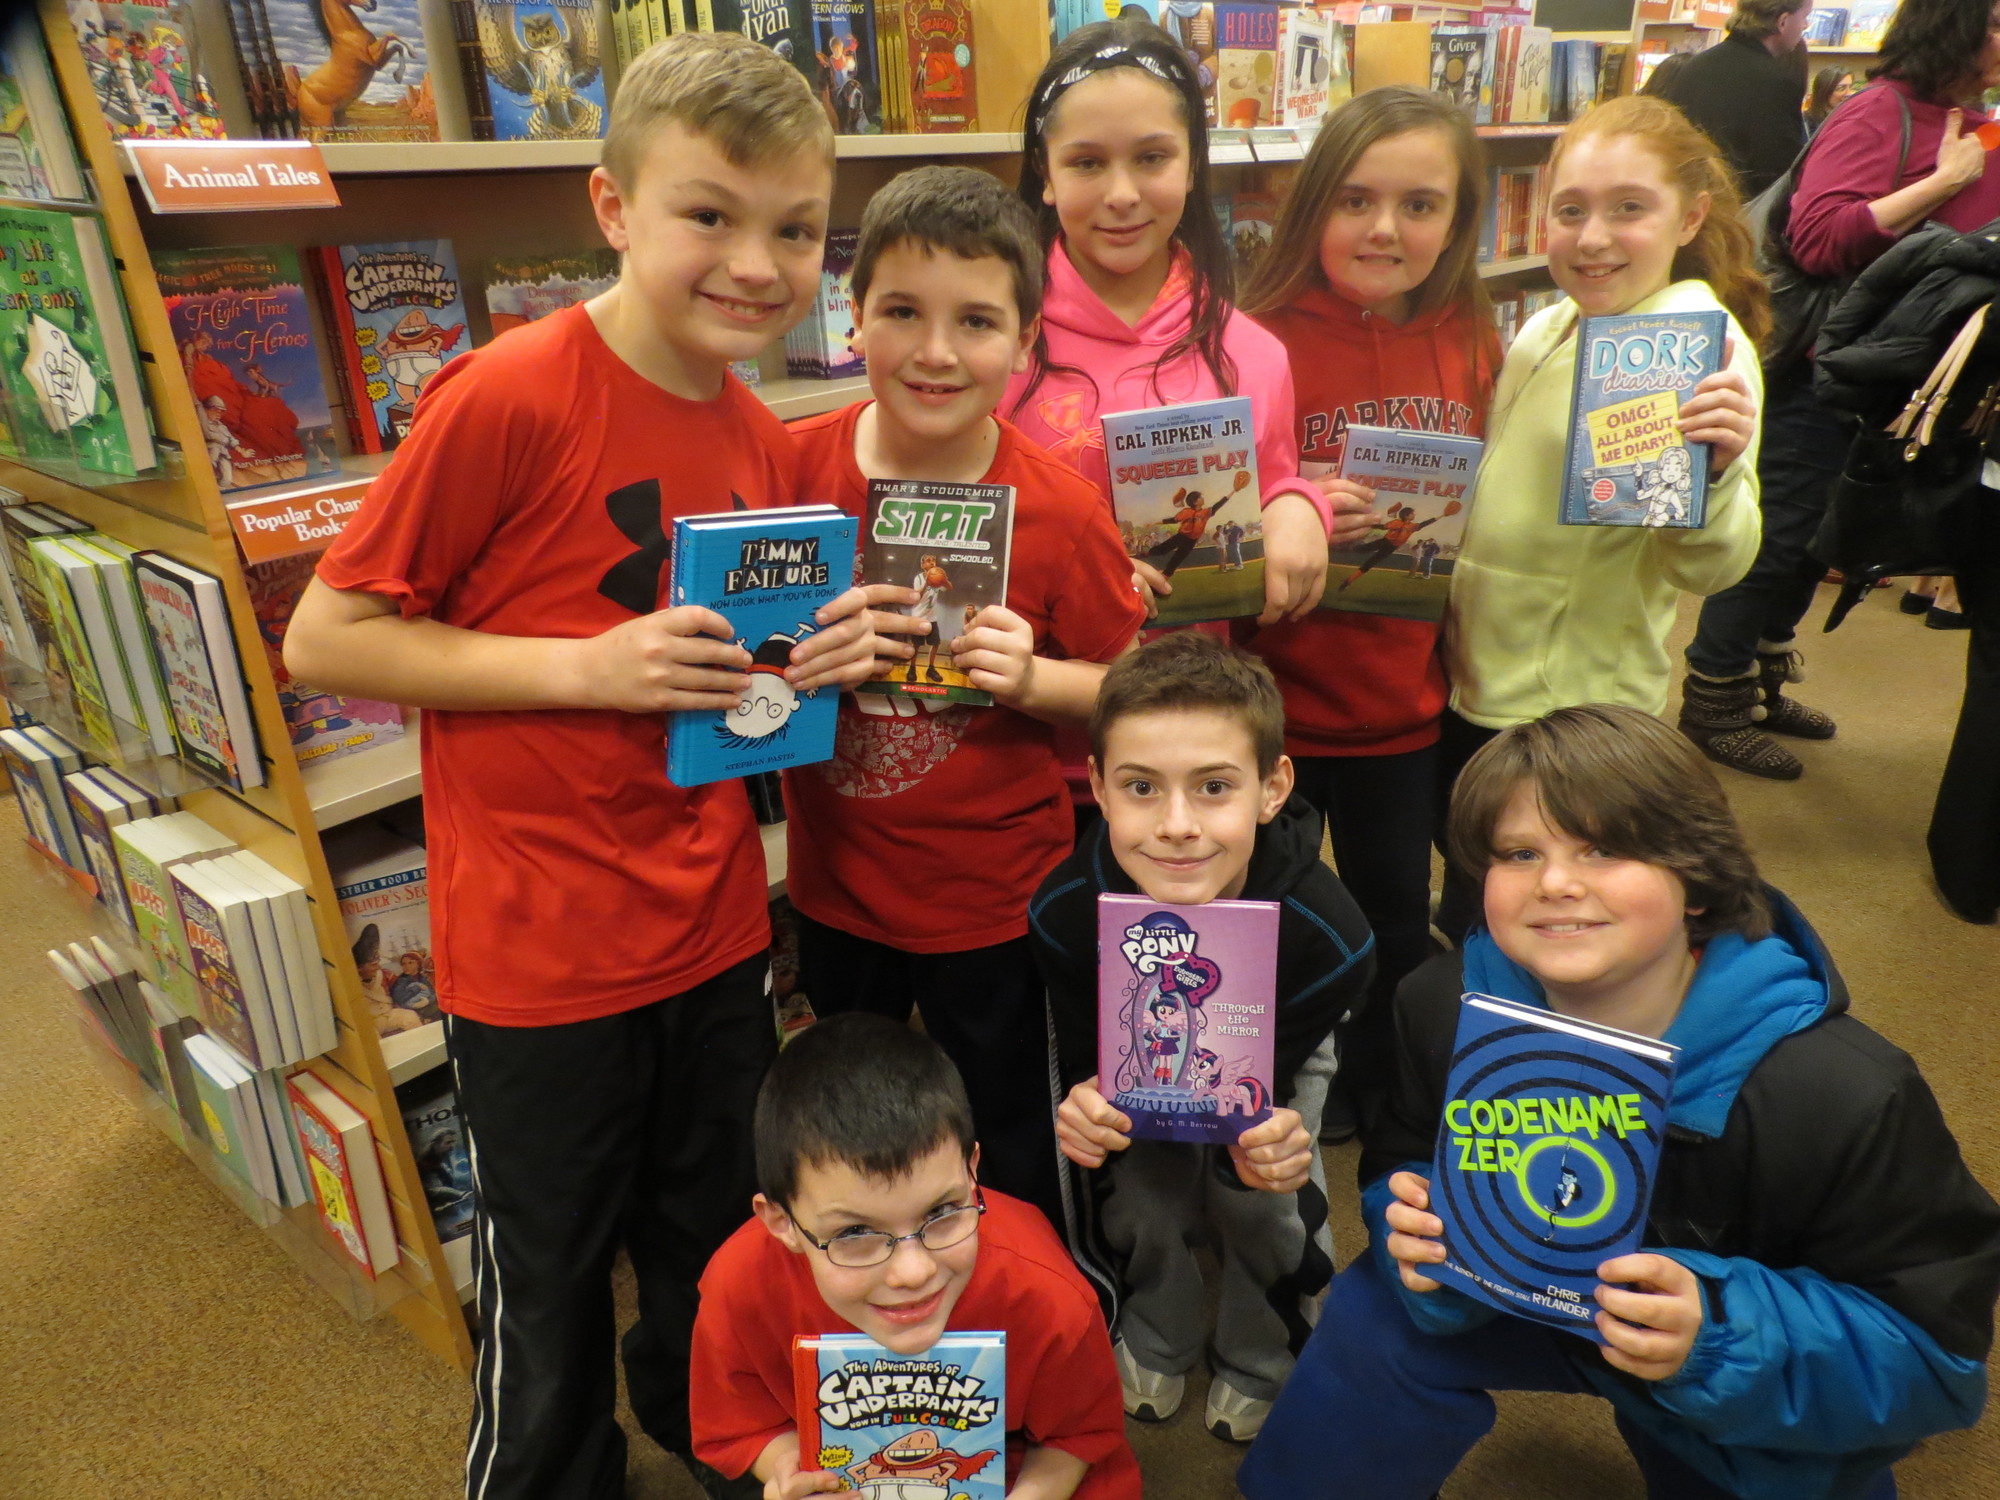 Parkway Elementary School students left Barnes and Noble in Carle Place with new books to read after attending Literacy Night earlier this month.